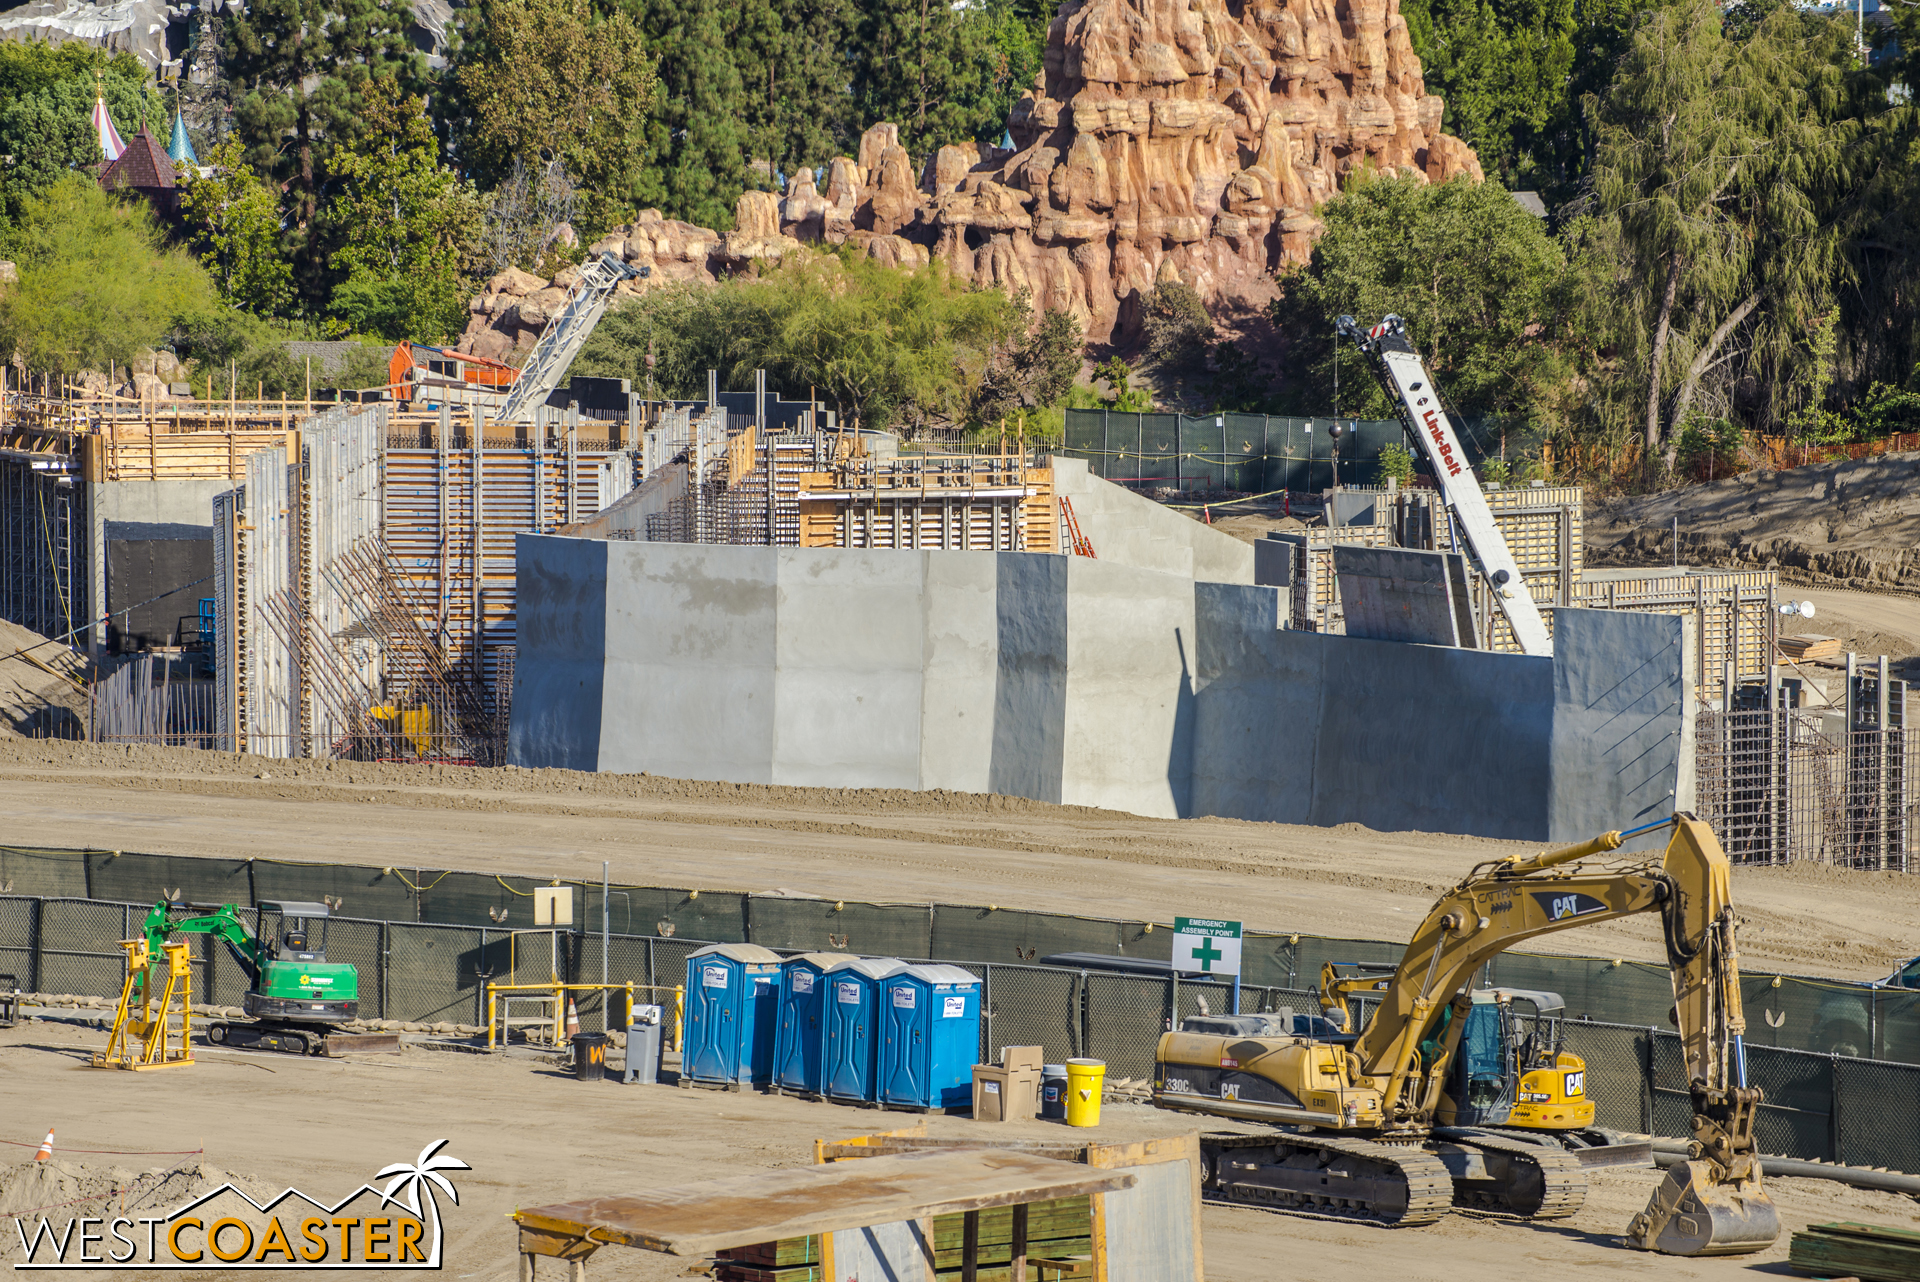  No openings cast in, though, so I'm not sure how these will play into "Star Wars" Land's layout. 